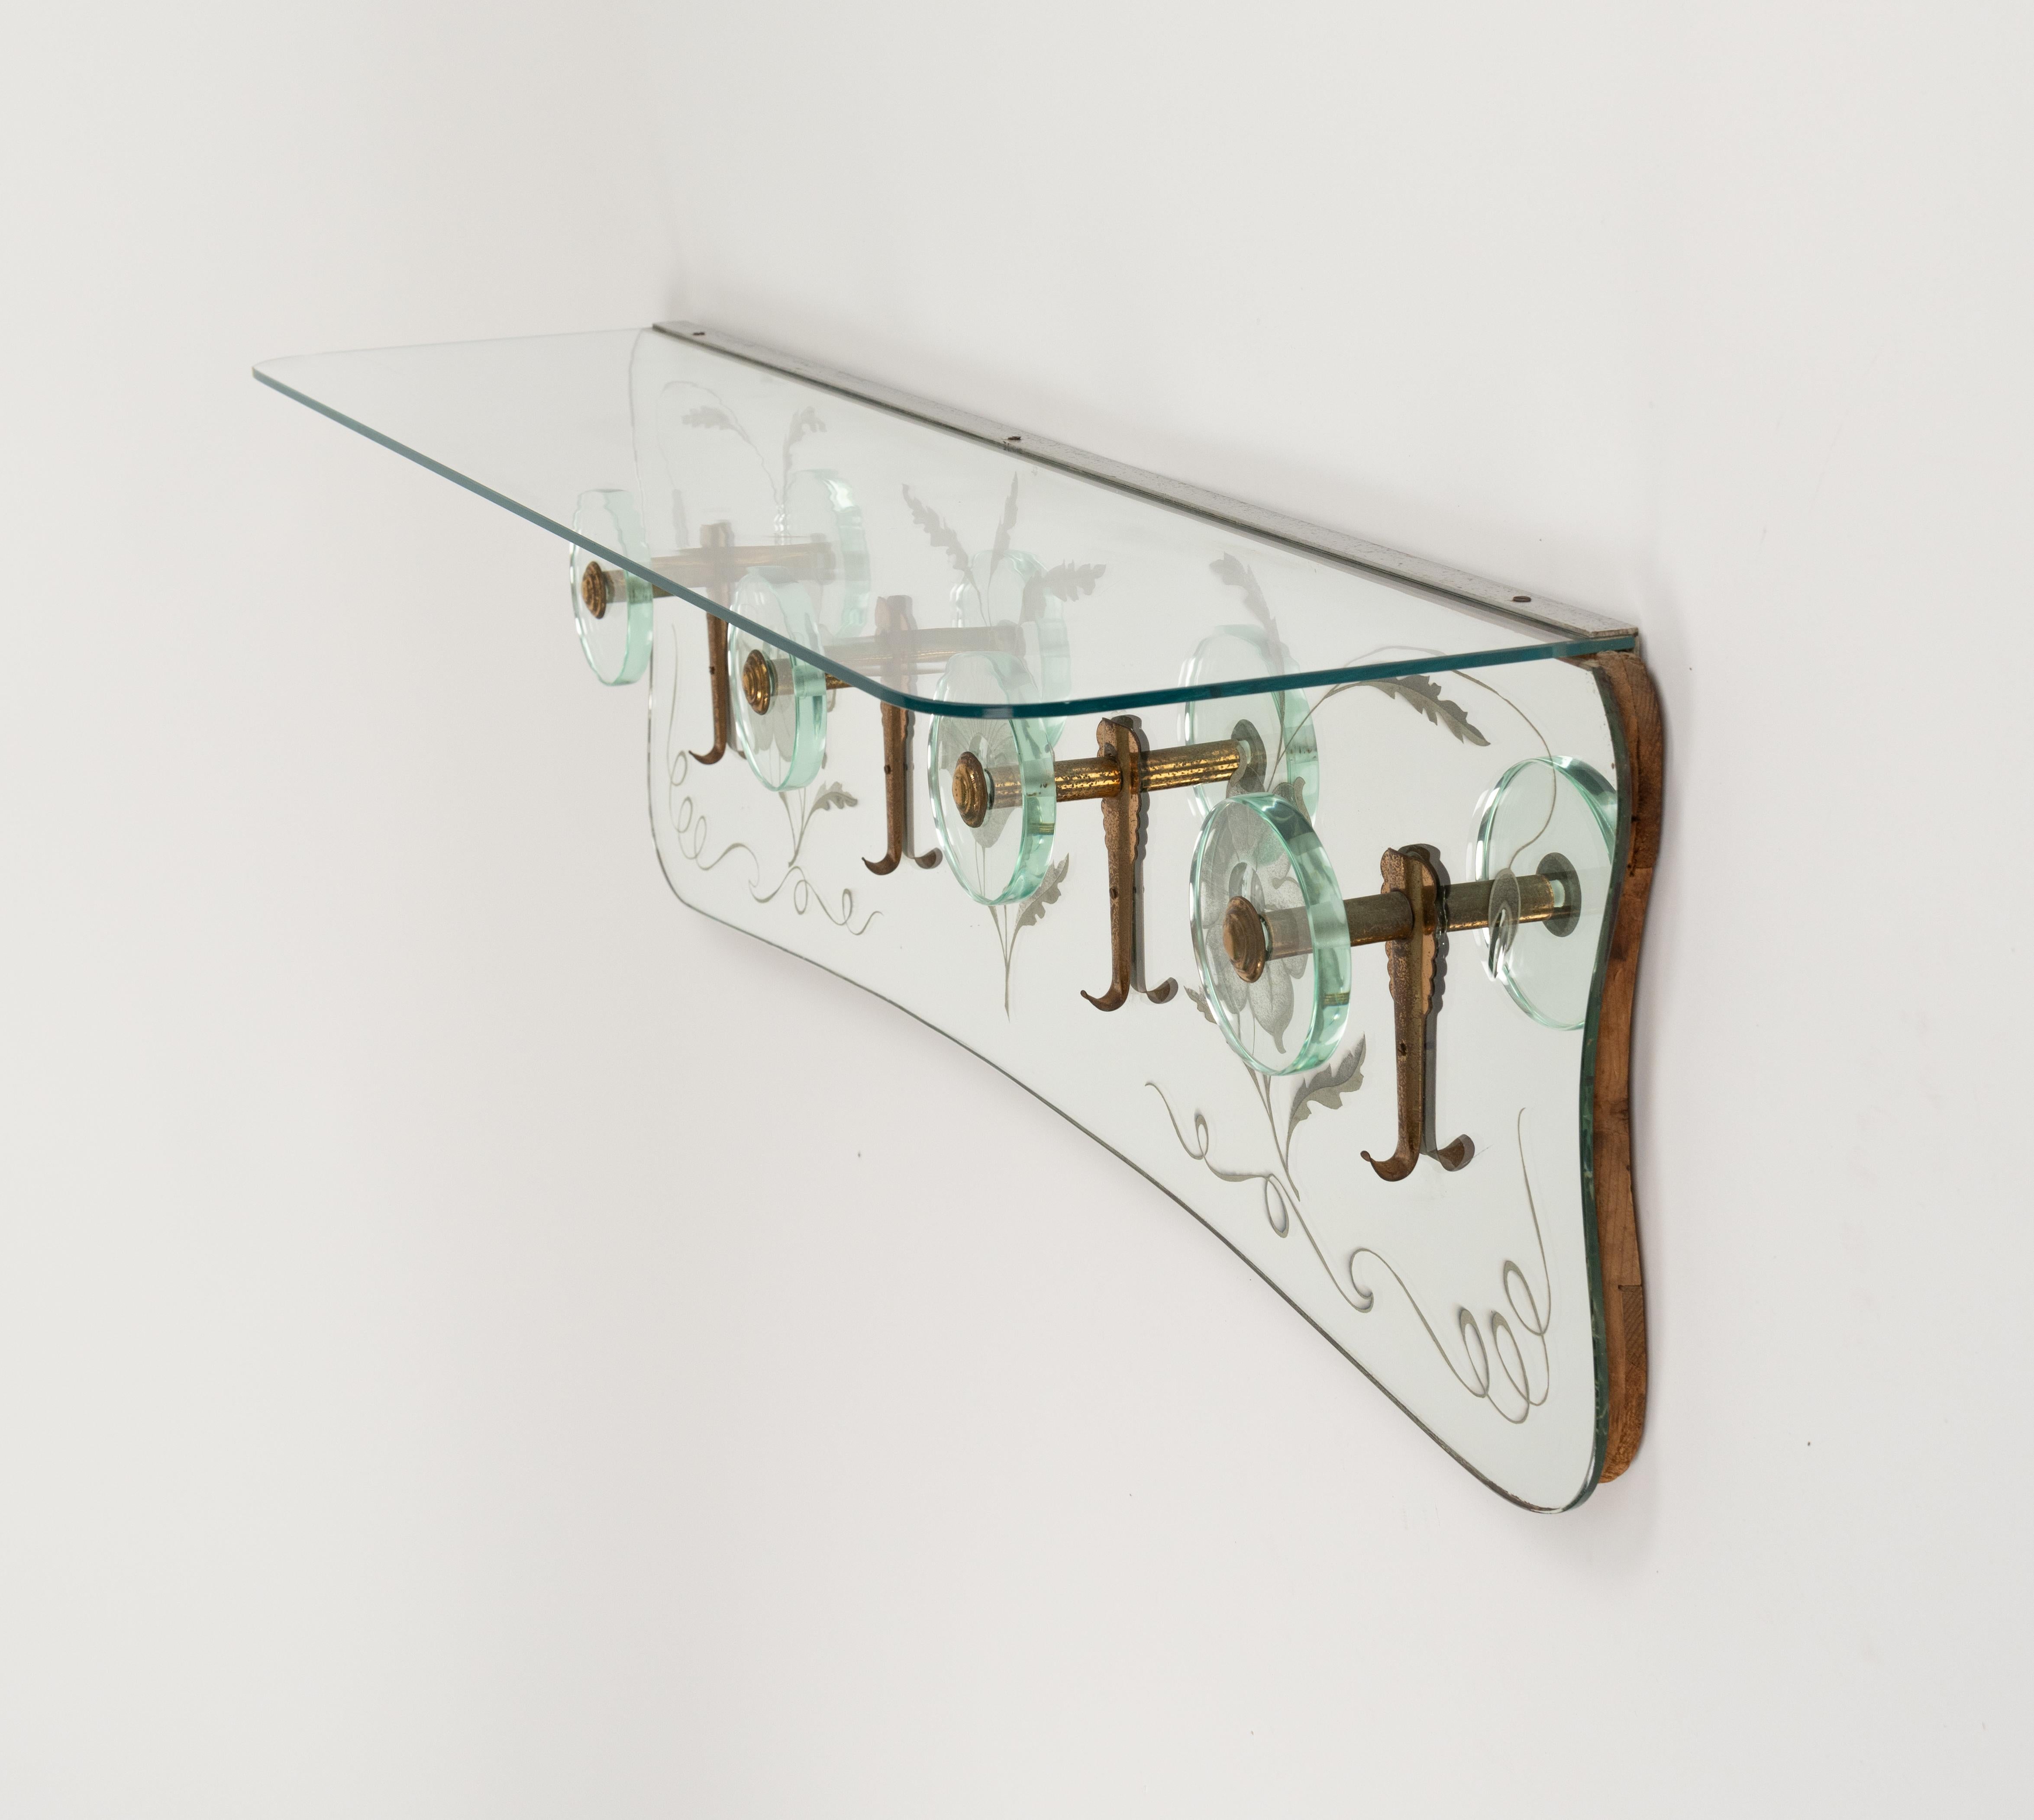 Midcentury Coat Rack Shelf in Mirror, Brass & Glass by Cristal Art, Italy, 1950s For Sale 8